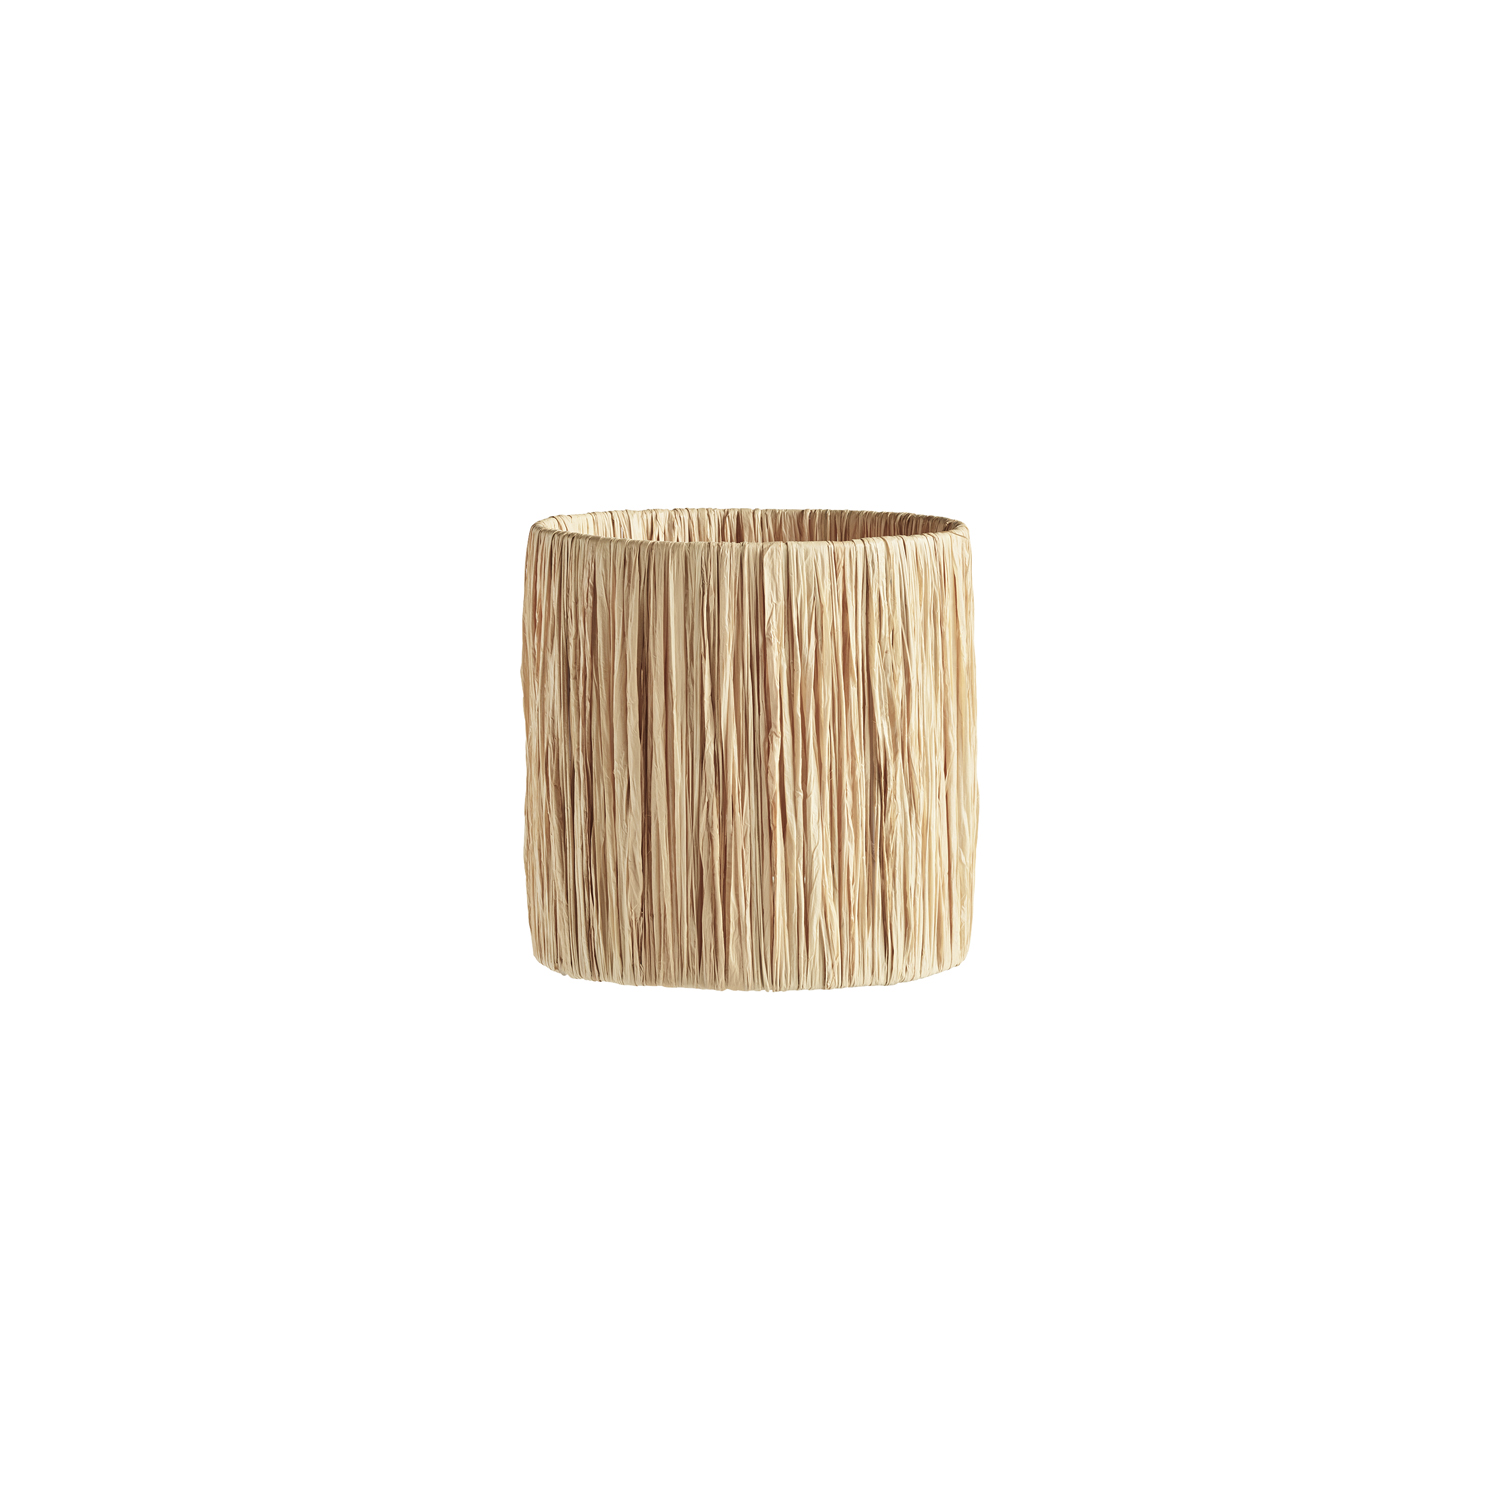 Shade In Raffia S Tine K Home, How Much Is Table Lamp Shades Measured In Cm